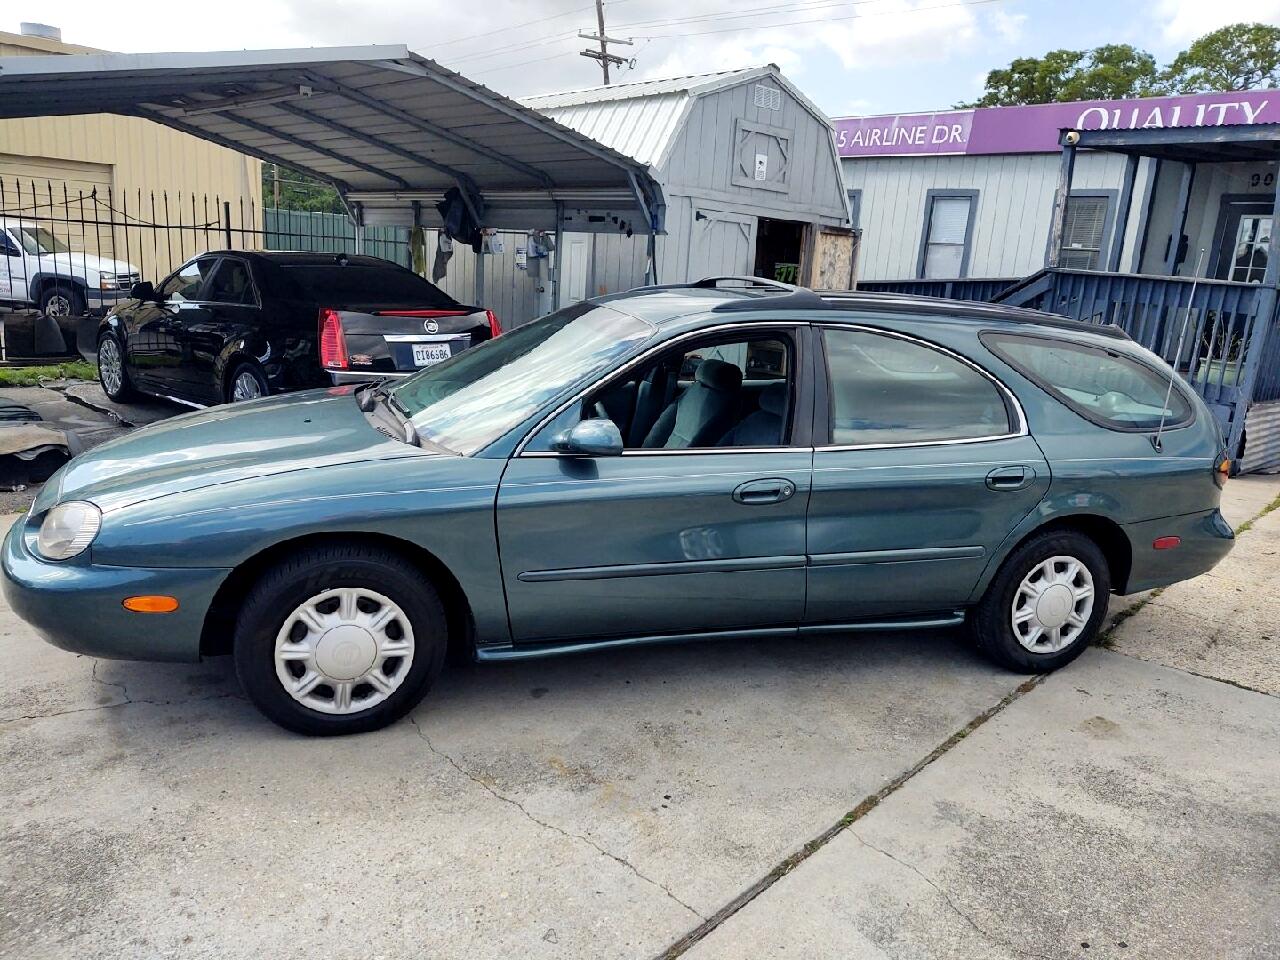 Used 1997 Mercury Sable's nationwide for sale - MotorCloud